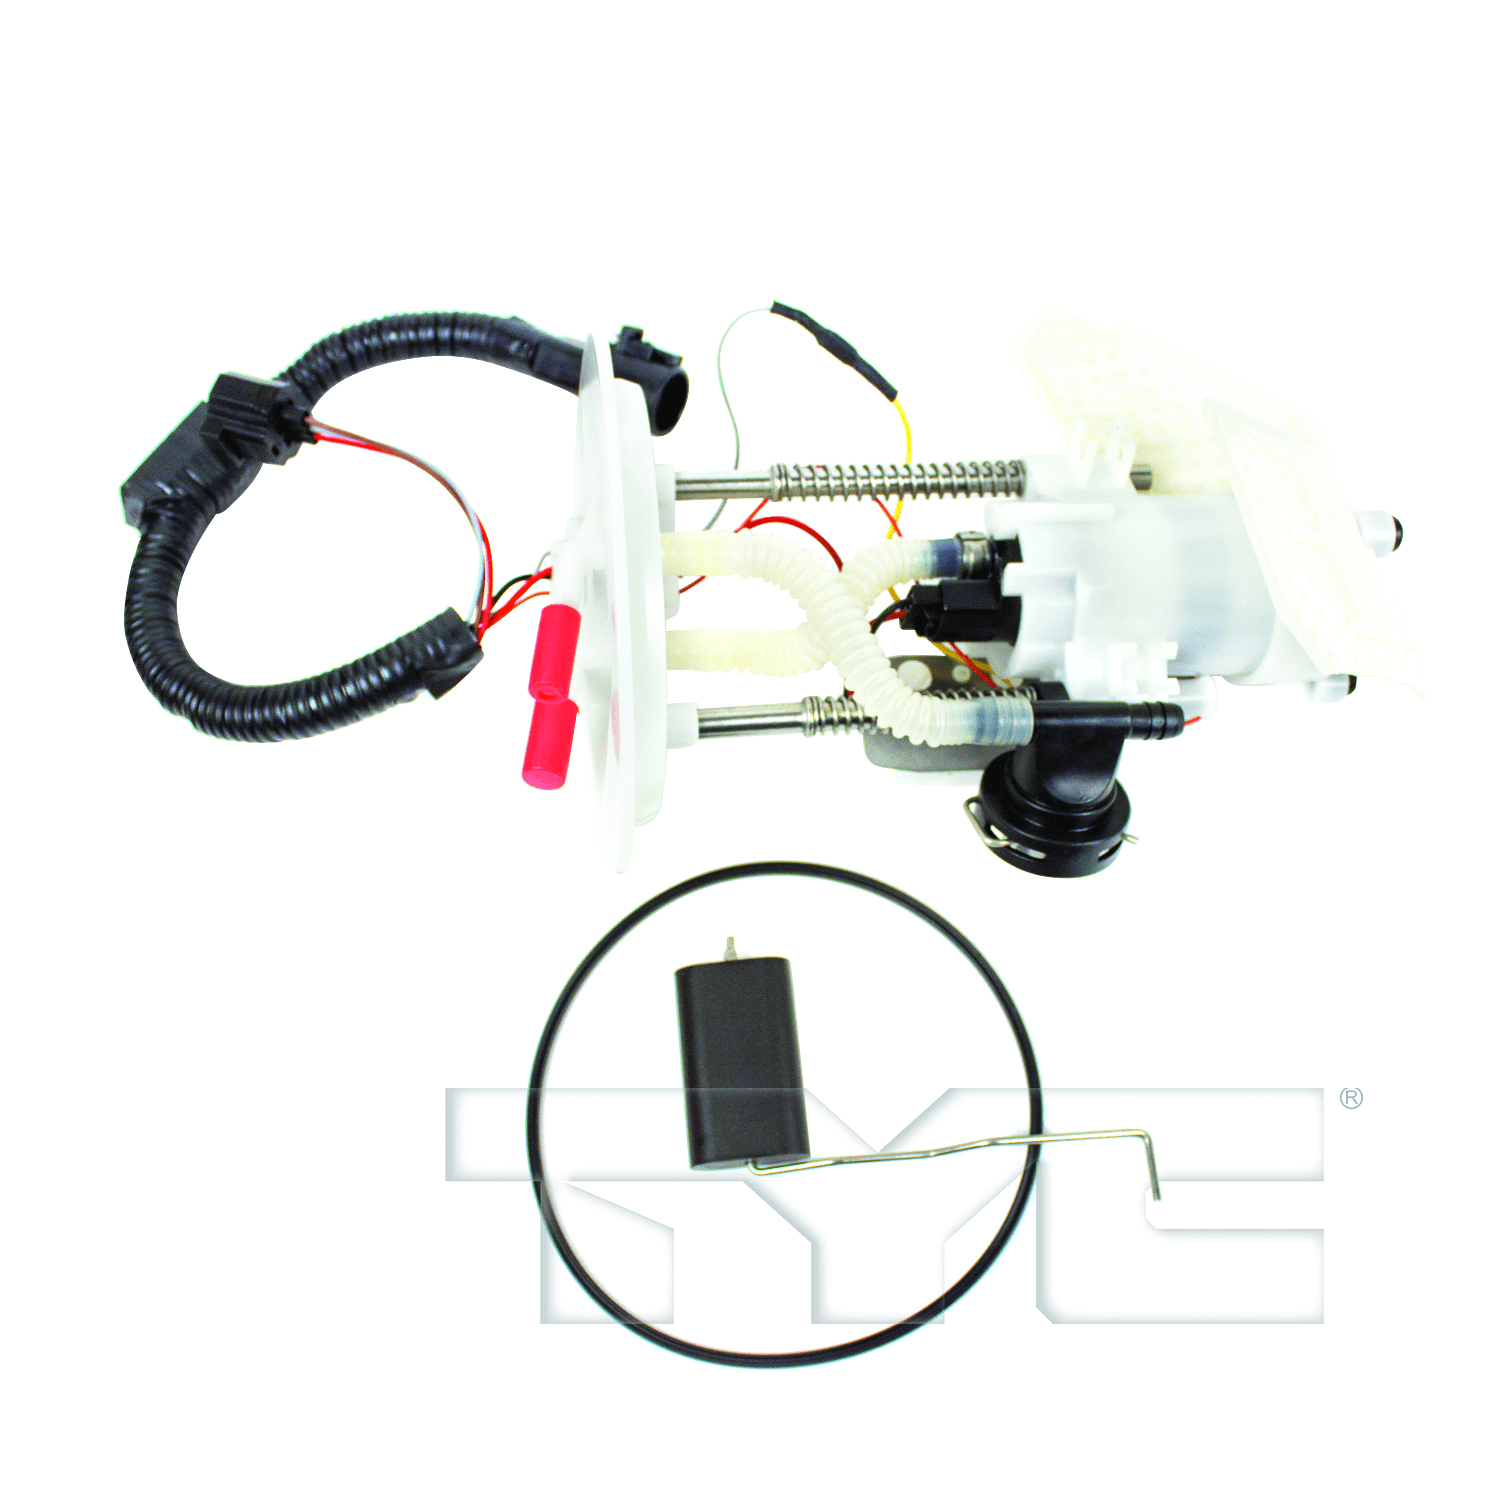 Fuel Pump Module Assembly for Ford Explorer Mercury Mountaineer V6 4.0L 02-03 